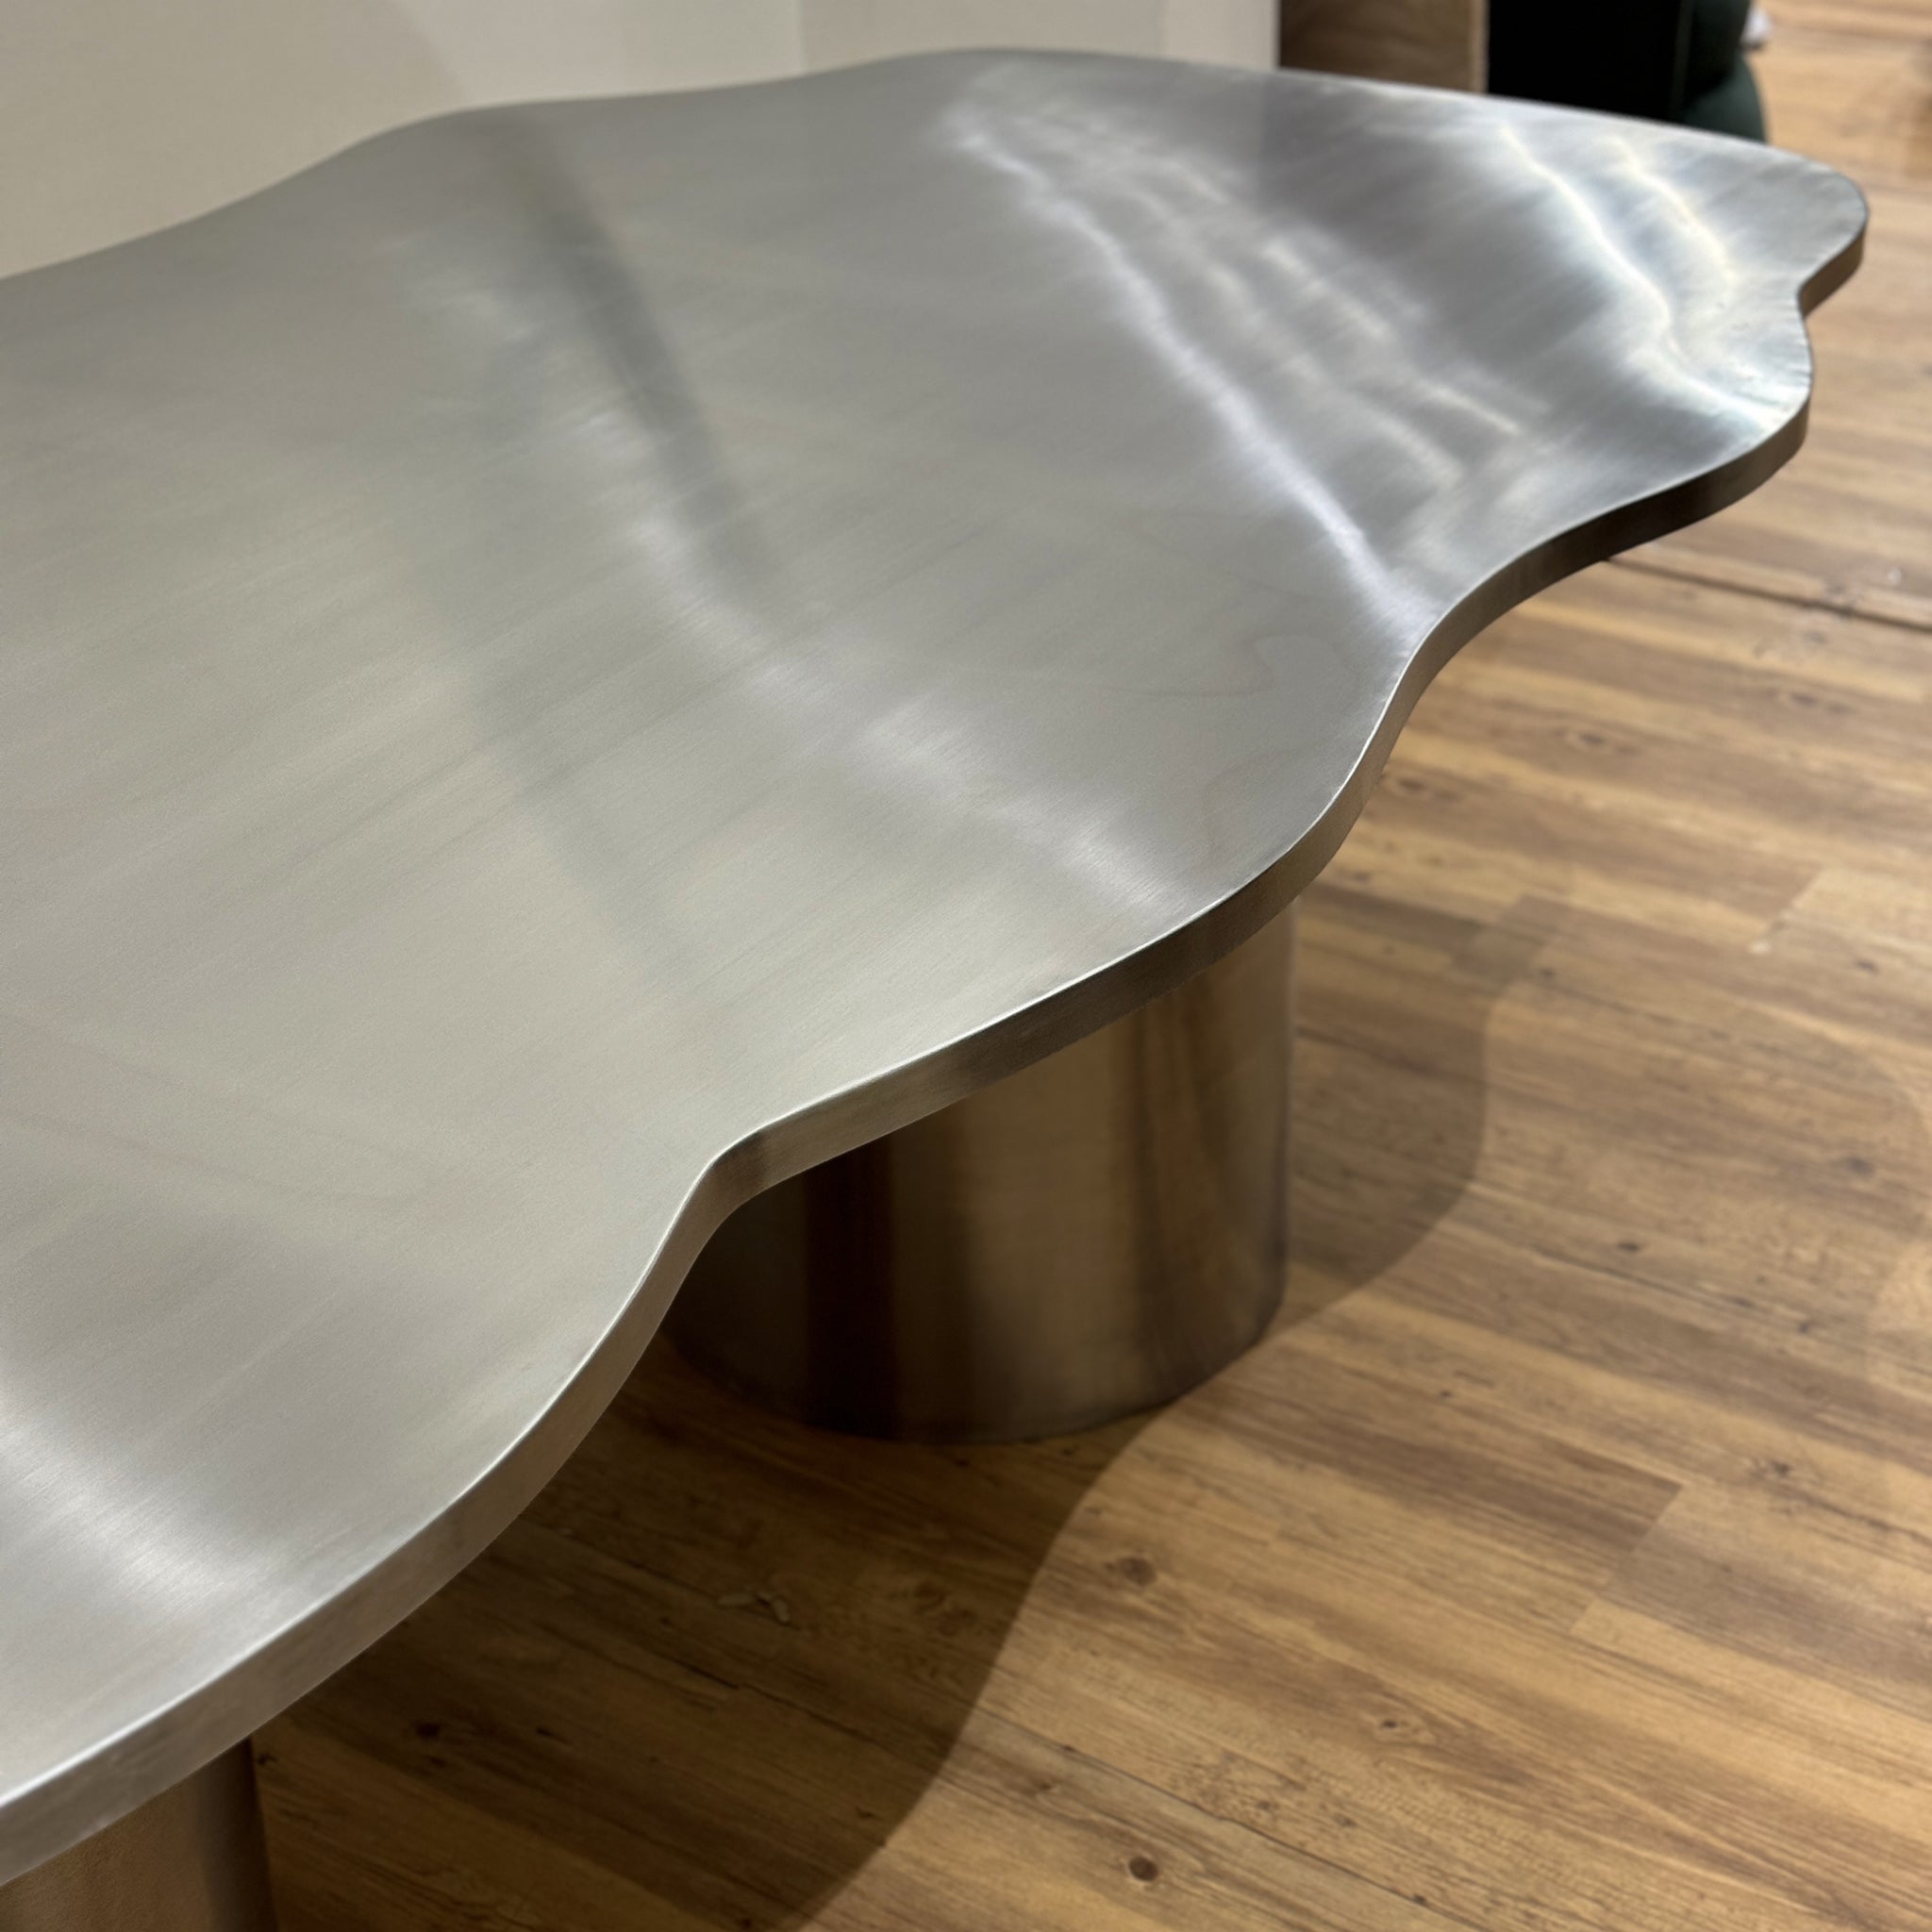 The Victoria Curvy Dining Table in Stainless Steel